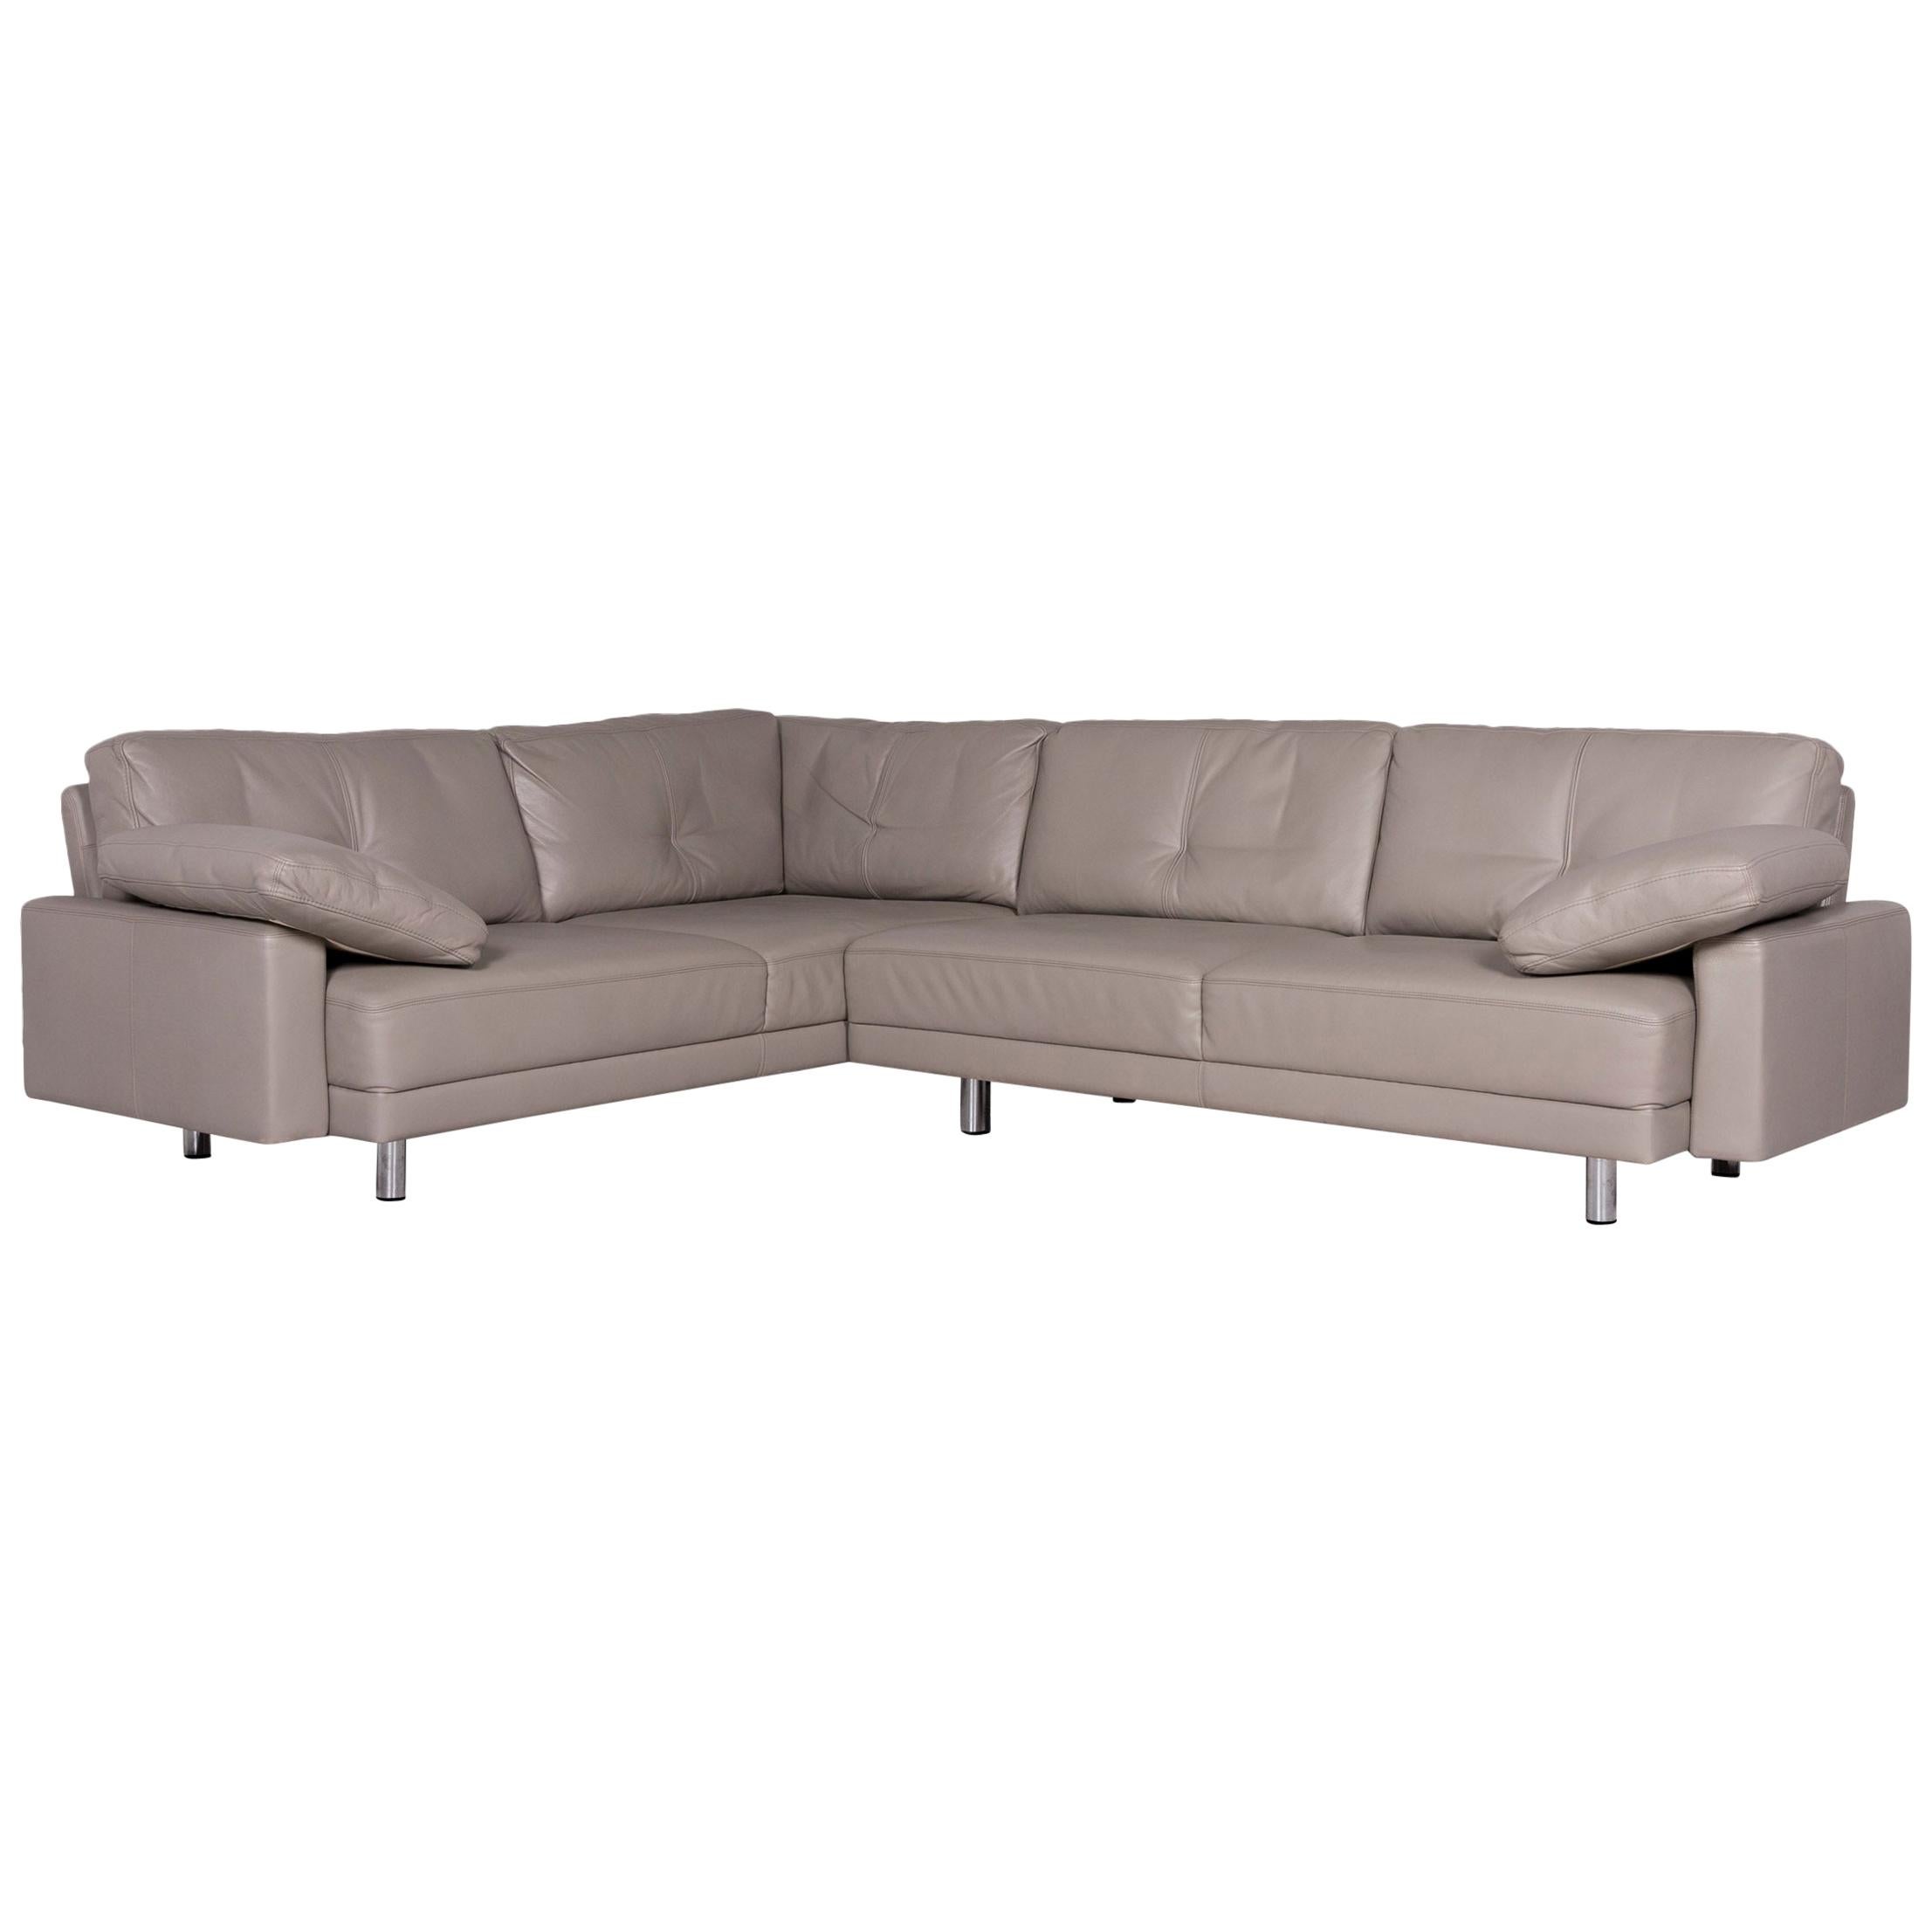 Brühl & Sippold Leather Corner Sofa Gray Sofa Couch For Sale